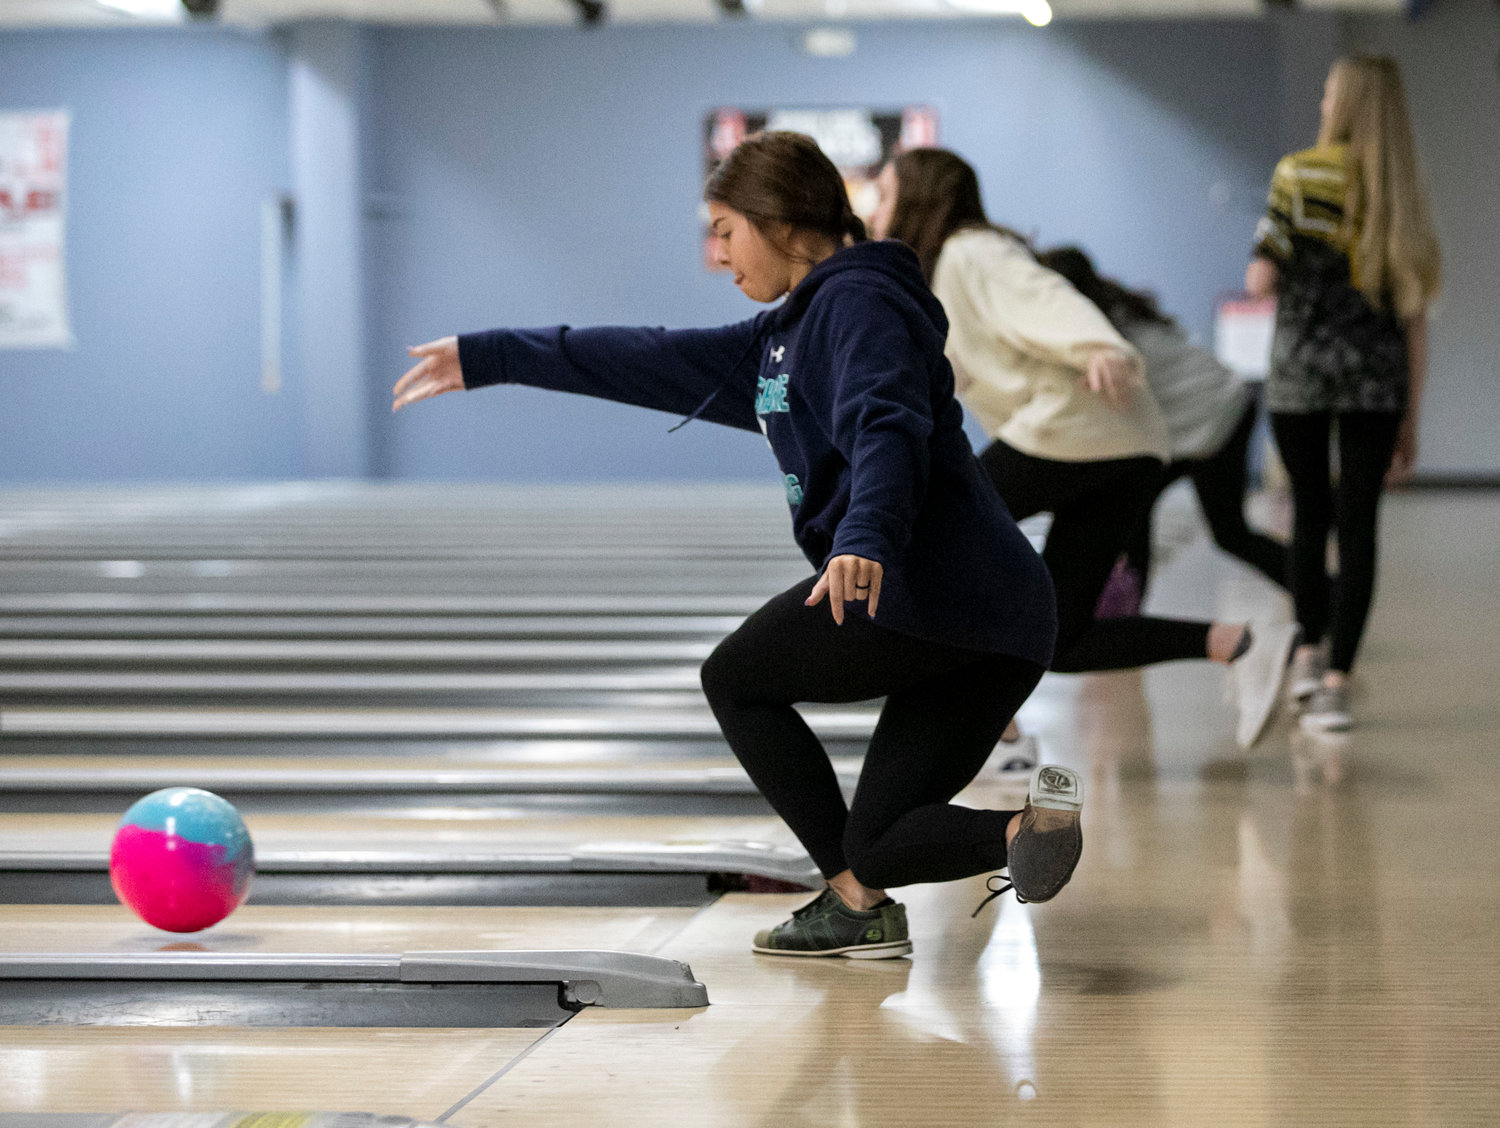 Gulf Shores’ Adriana Venus follows through on a shot during Jan. 19’s qualifying round of the South Regional bowling championships in Spanish Fort. The Dolphins finished their season as state semifinalists after a first-round upset of East Limestone during Friday’s state finals at The Alley in Gadsden.